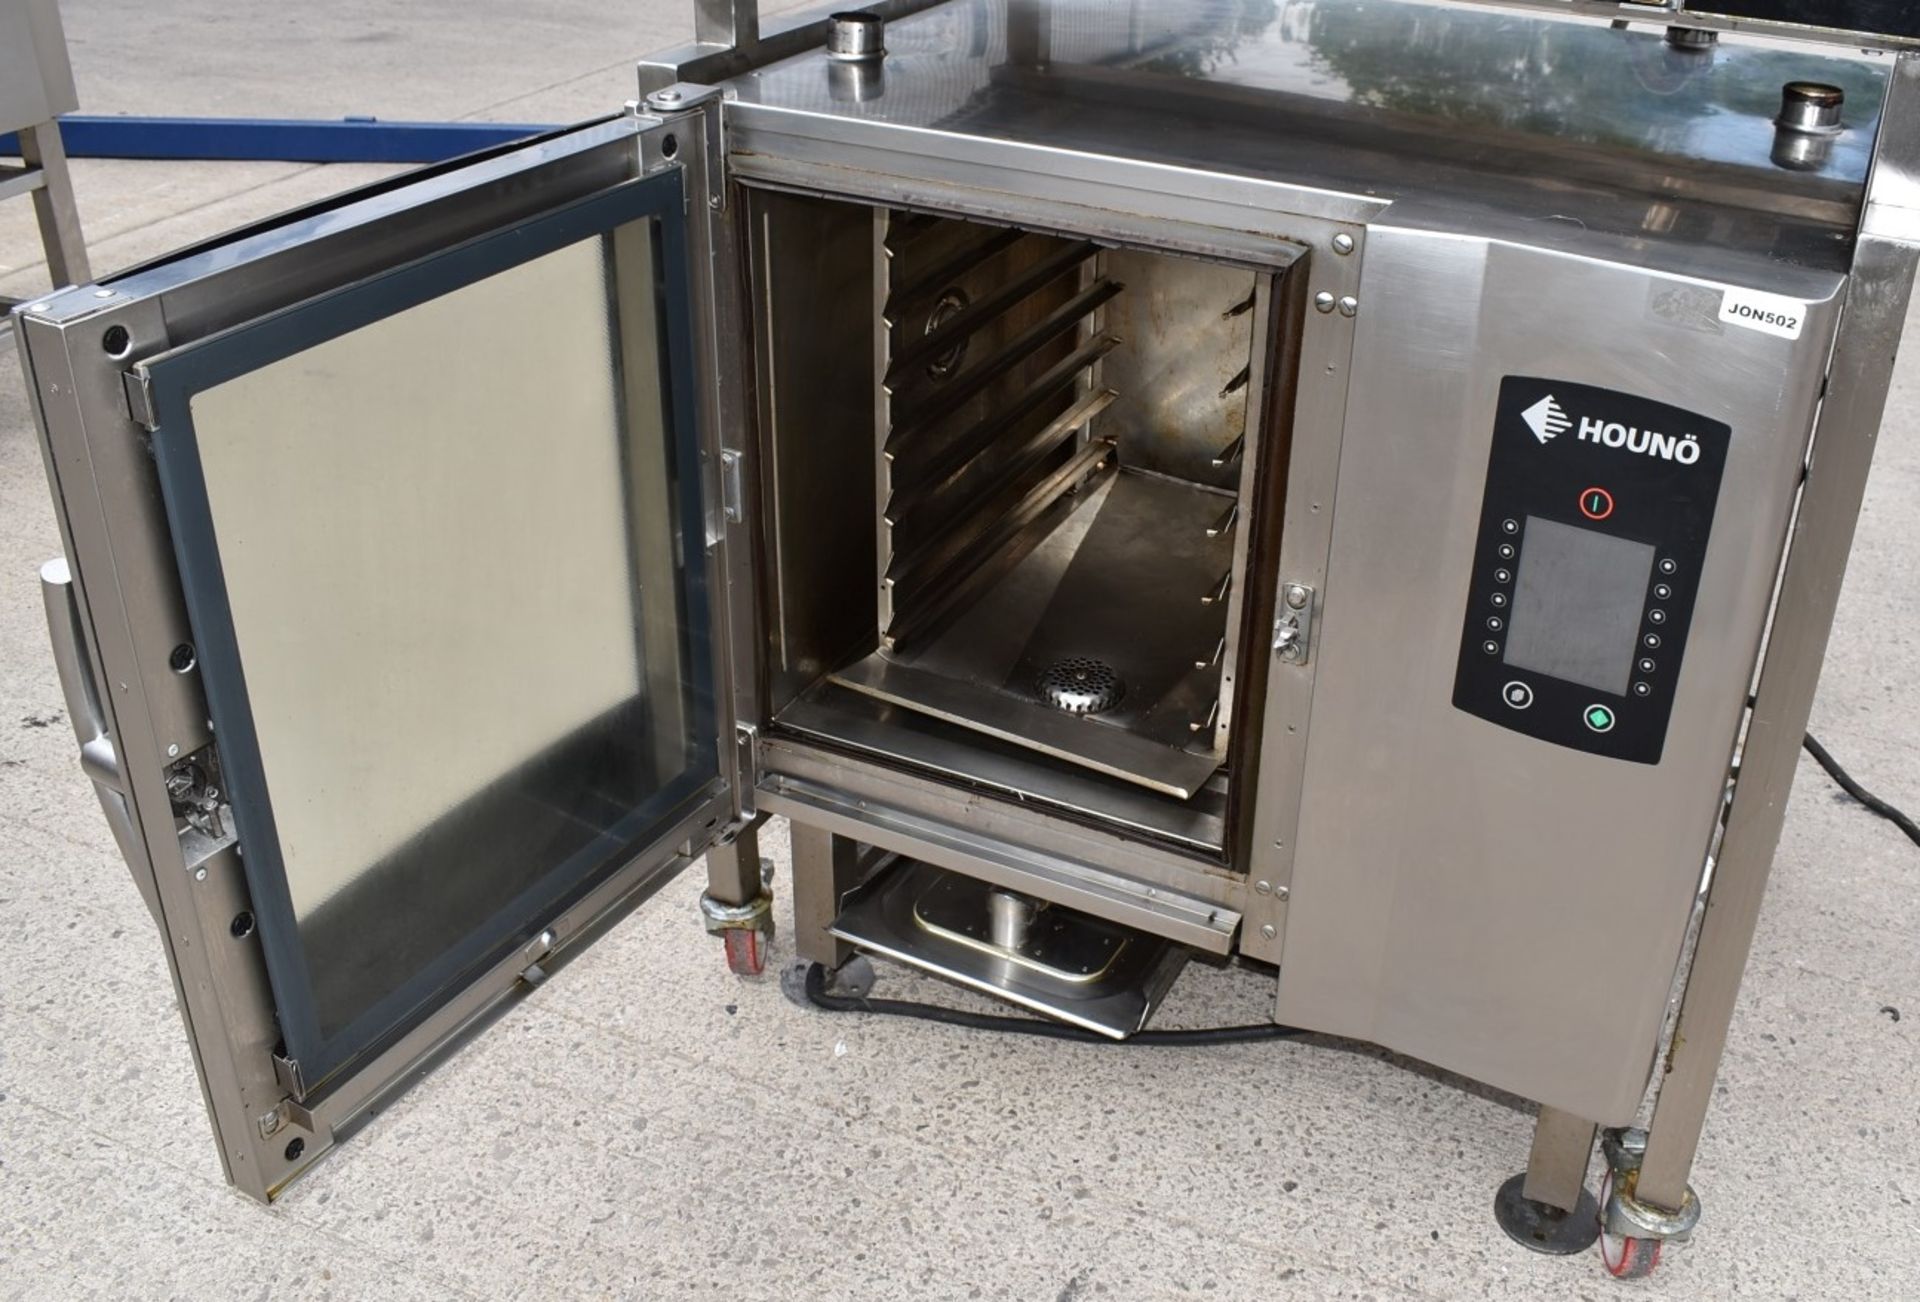 1 x Houno Electric Combi Oven and Fri-jado Rotisserie Oven Combo With Stand - 3 Phase - Image 4 of 22